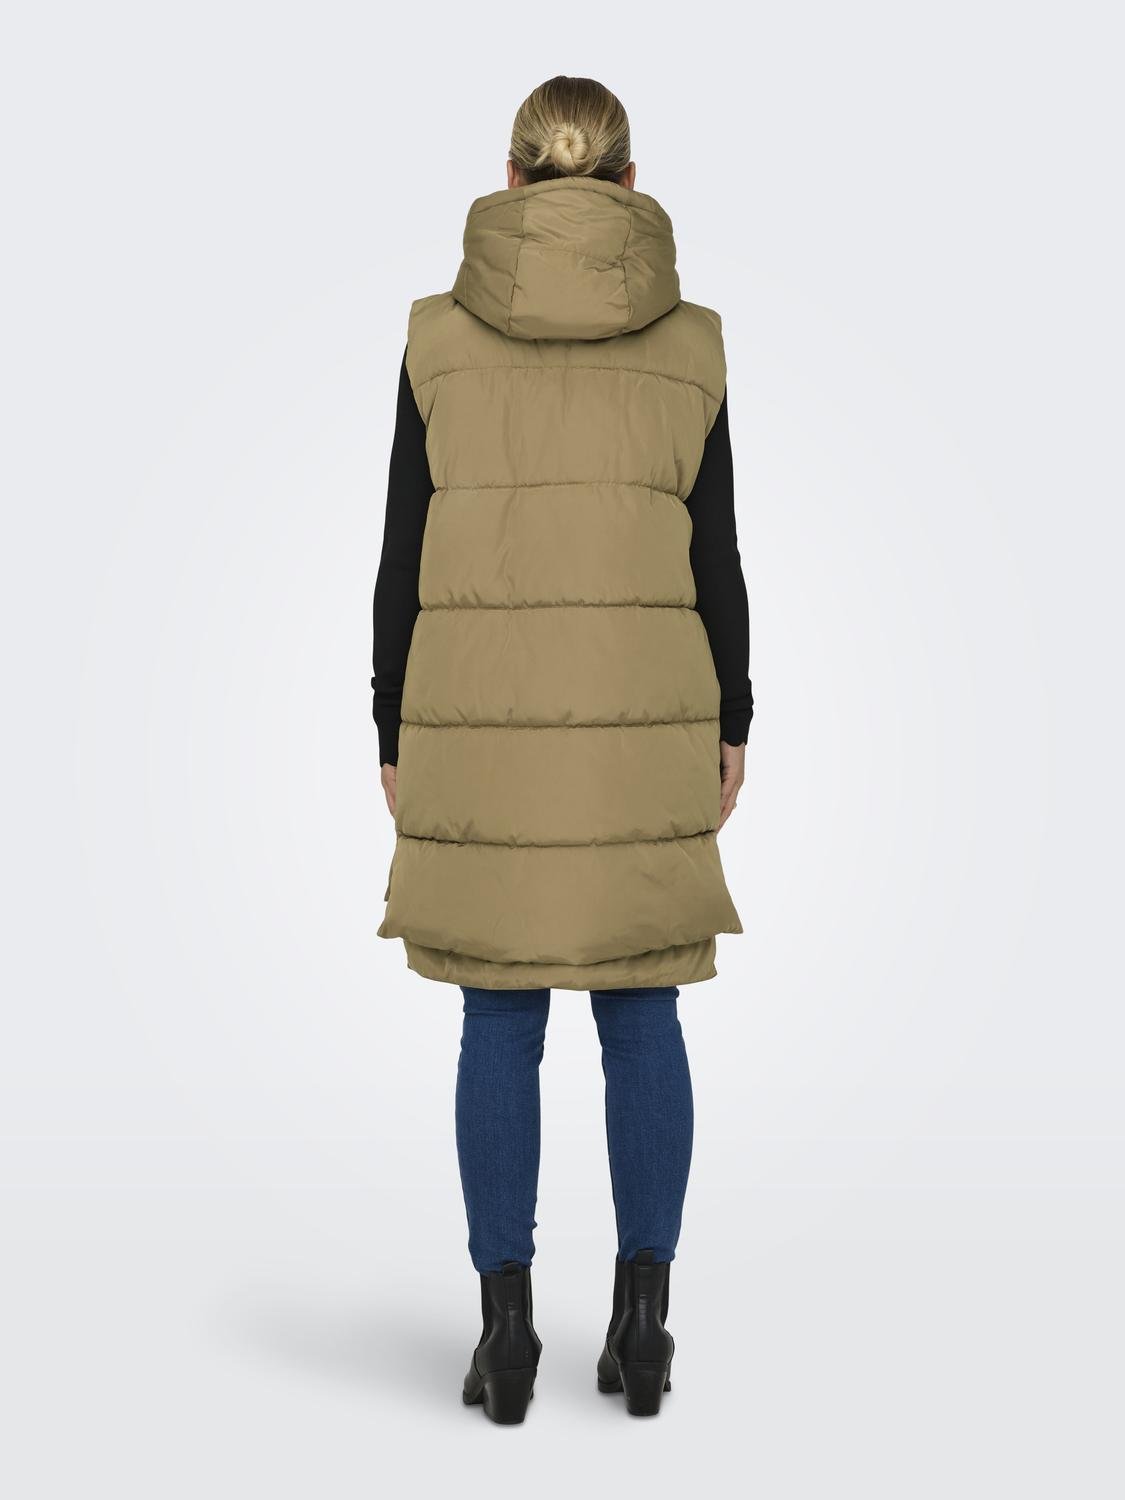 ONLY Capuchon Gilet -Otter - 15300259